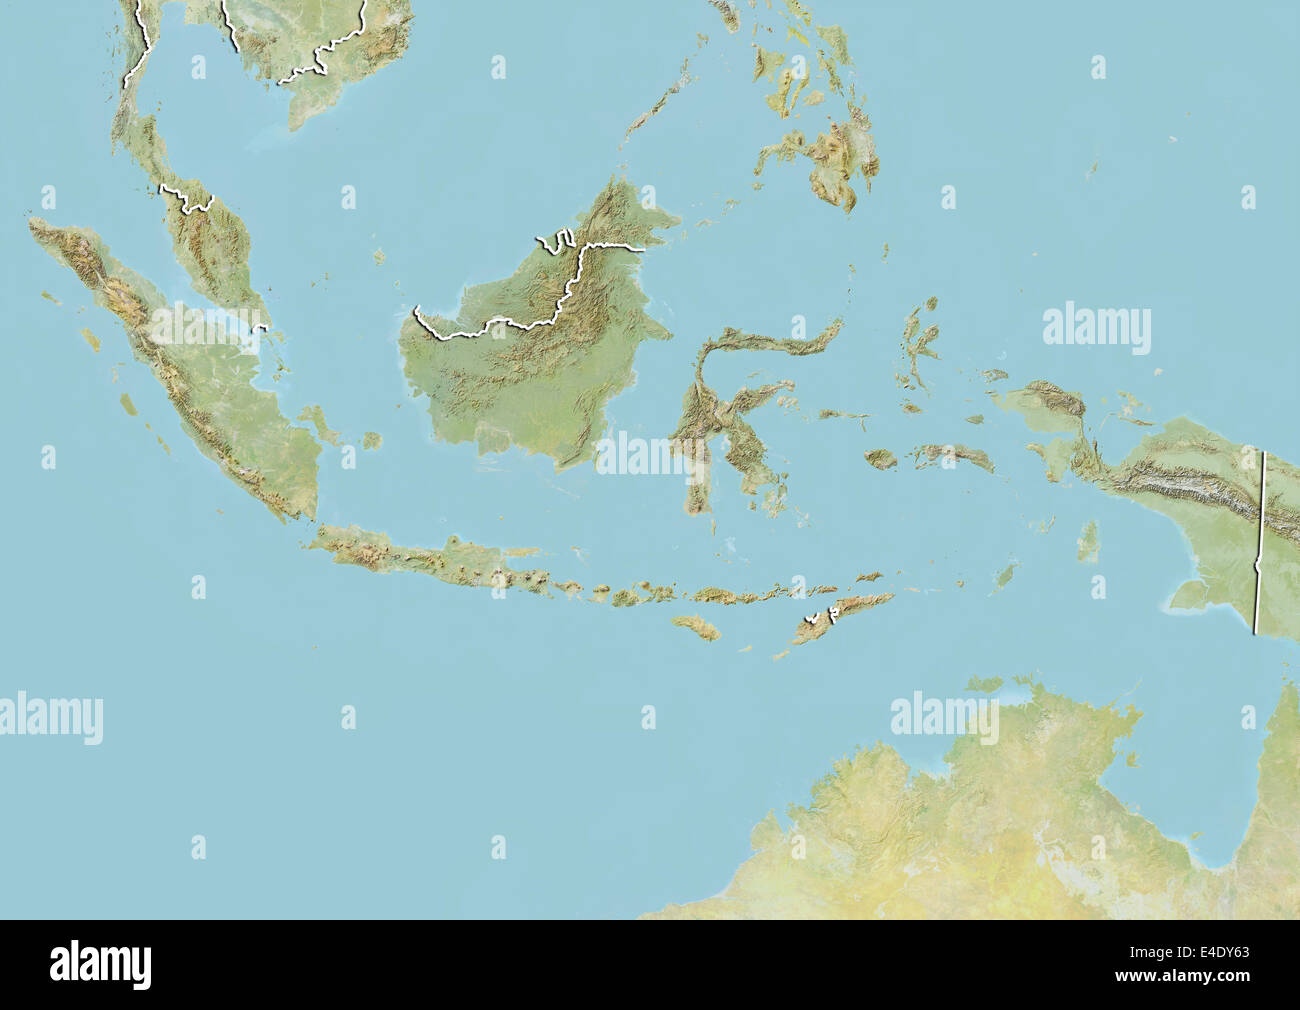 Detail Map Indonesia Hd Nomer 39